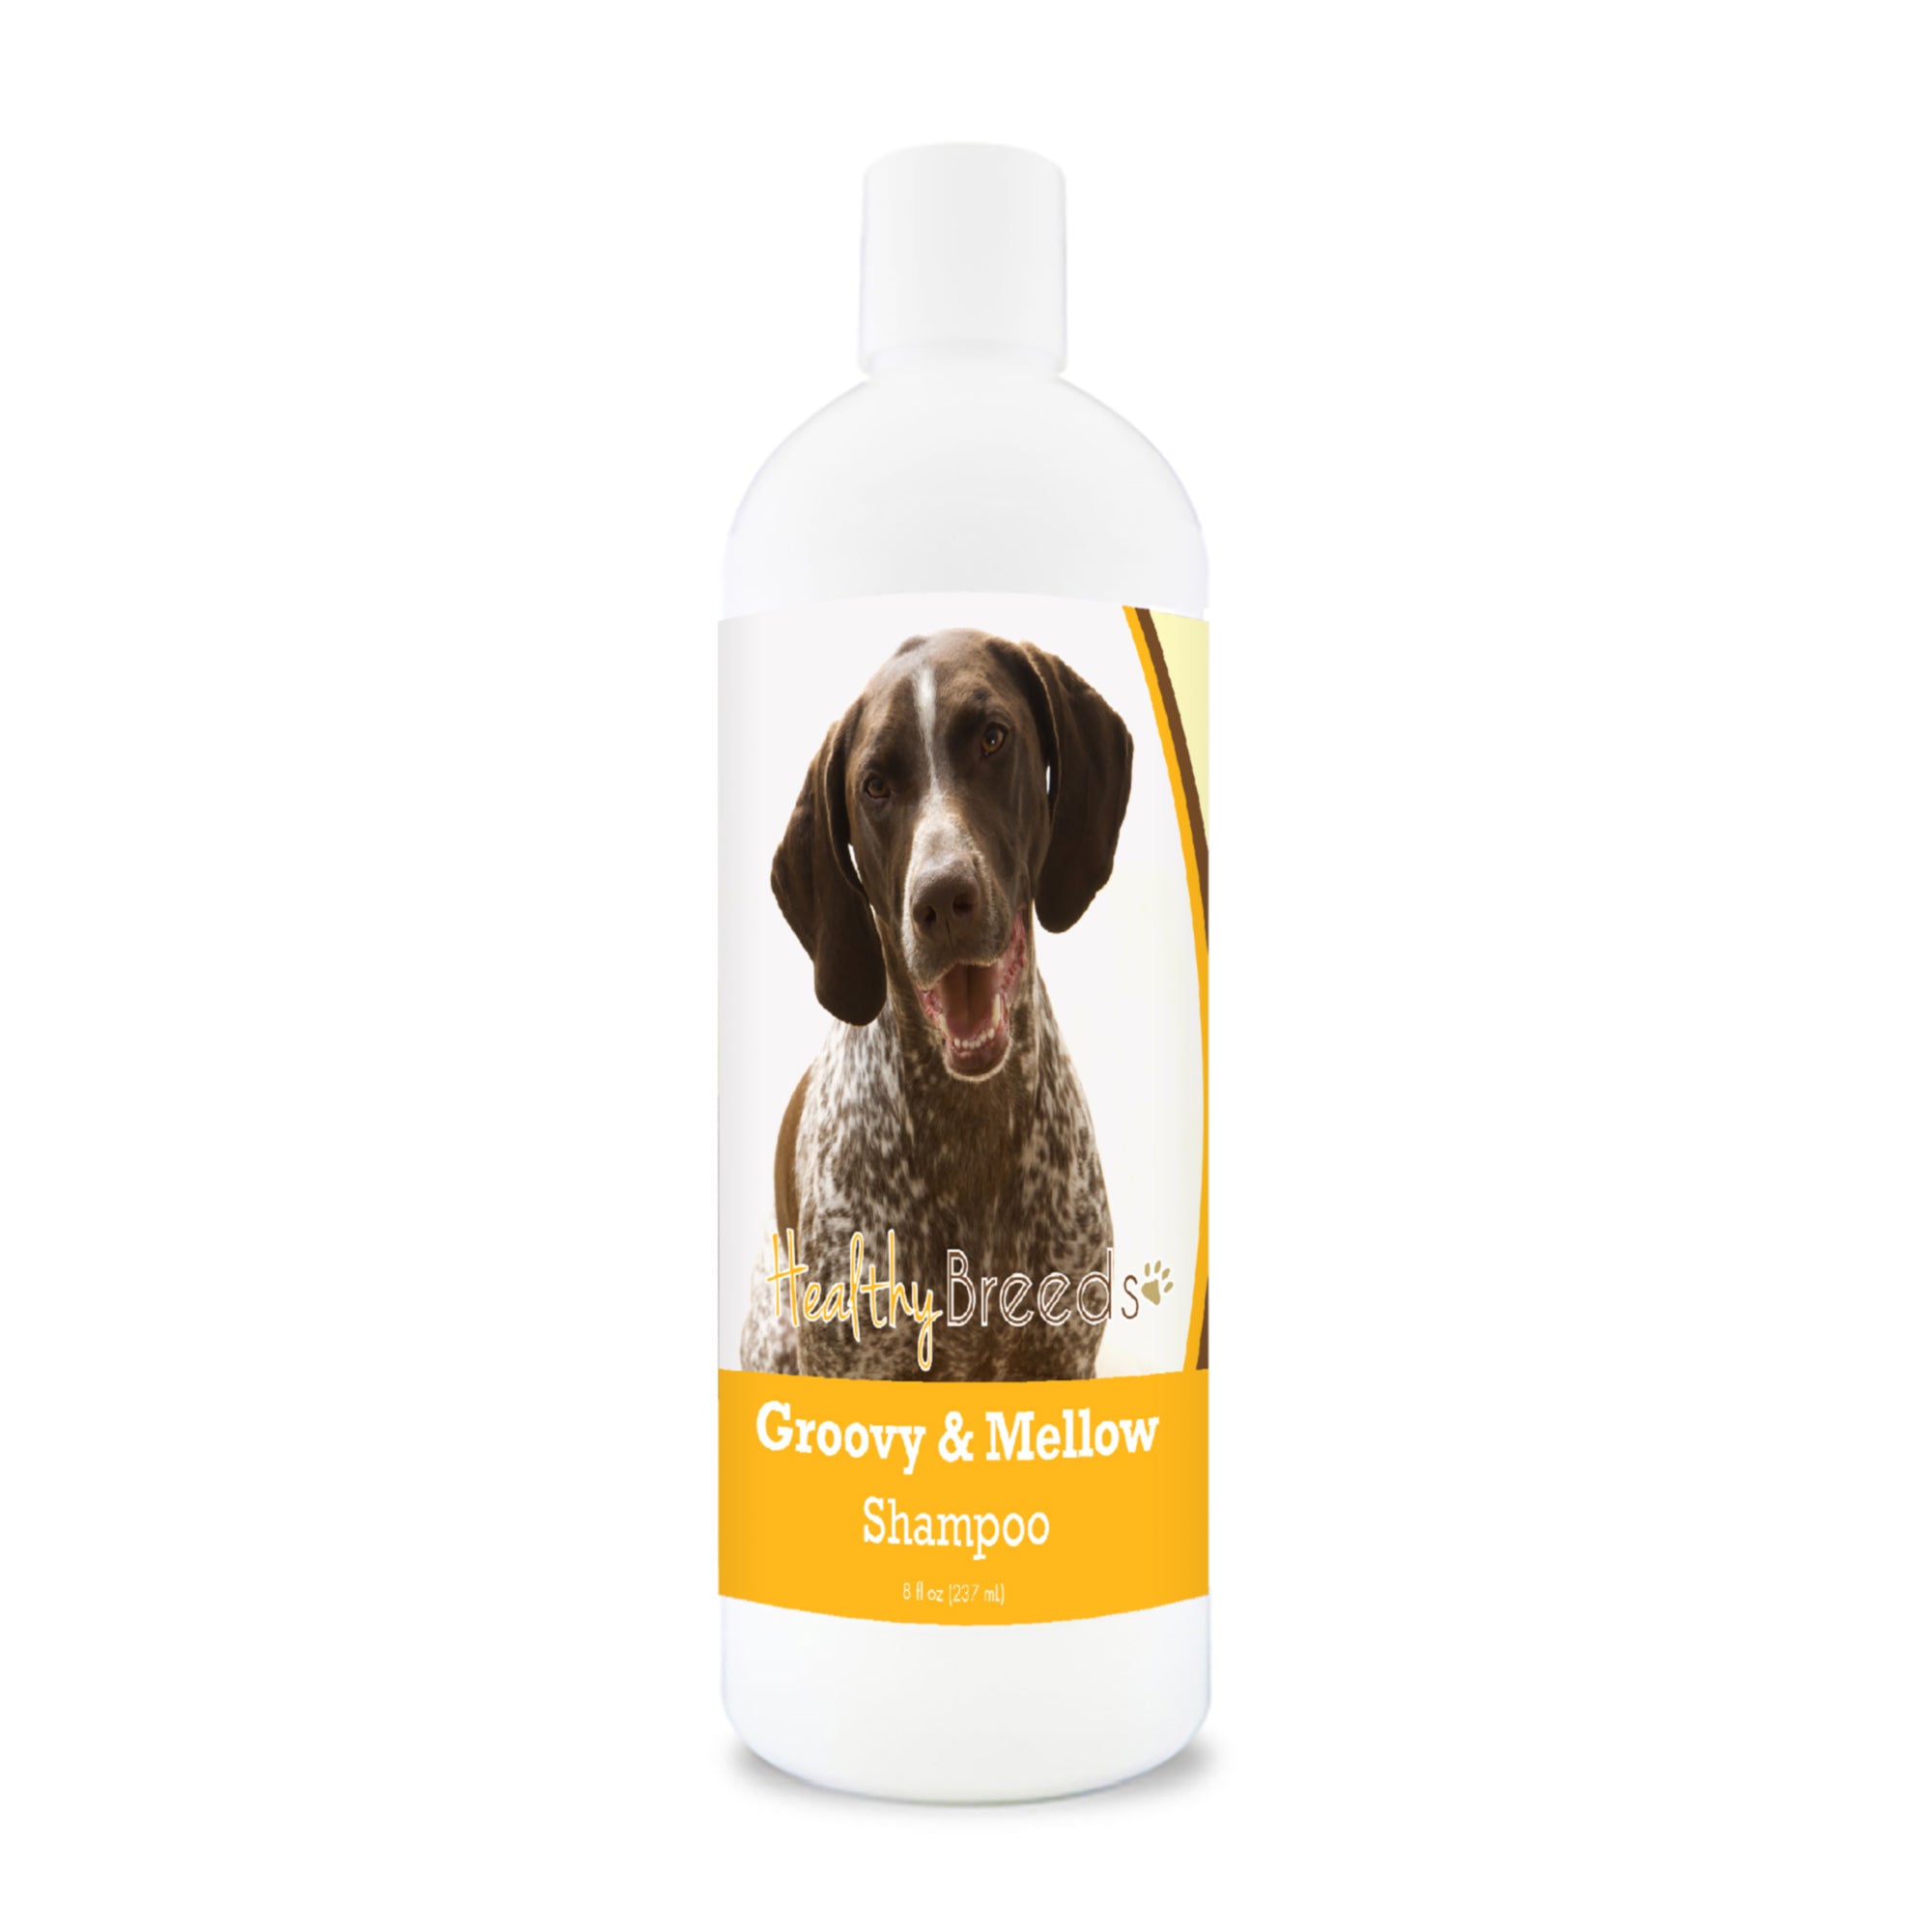 German Shorthaired Pointer Groovy & Mellow Shampoo 8 oz